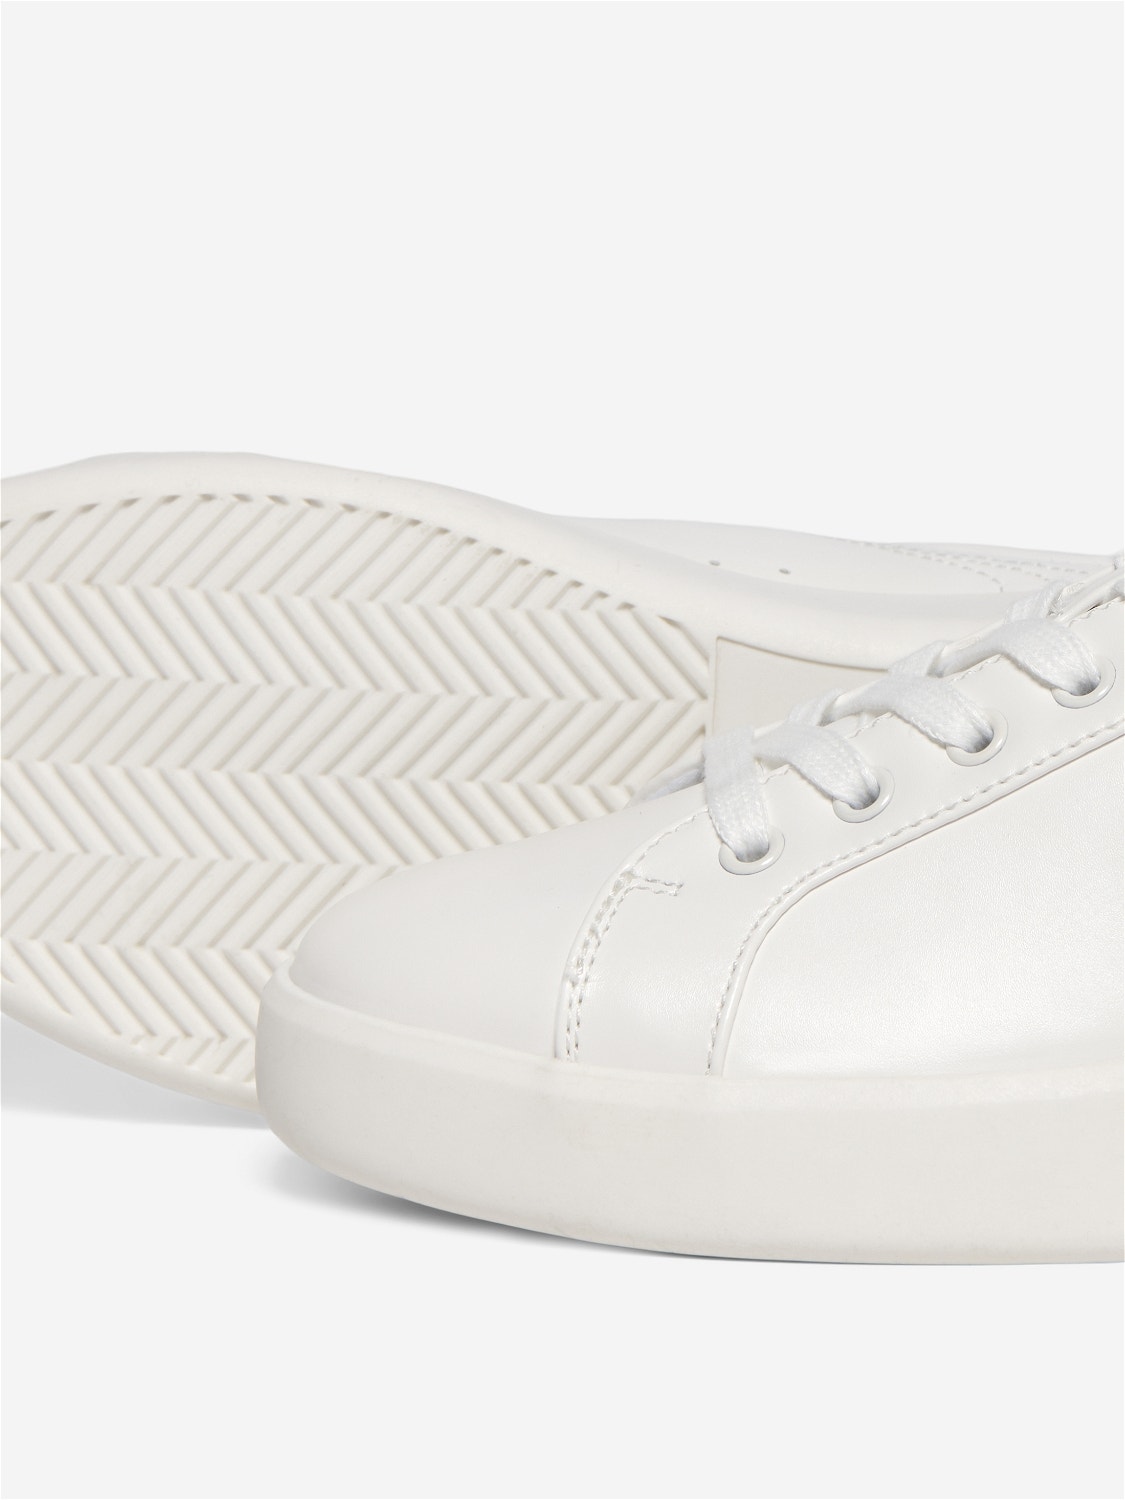 ONLY Turnschuhe -White - 15252747